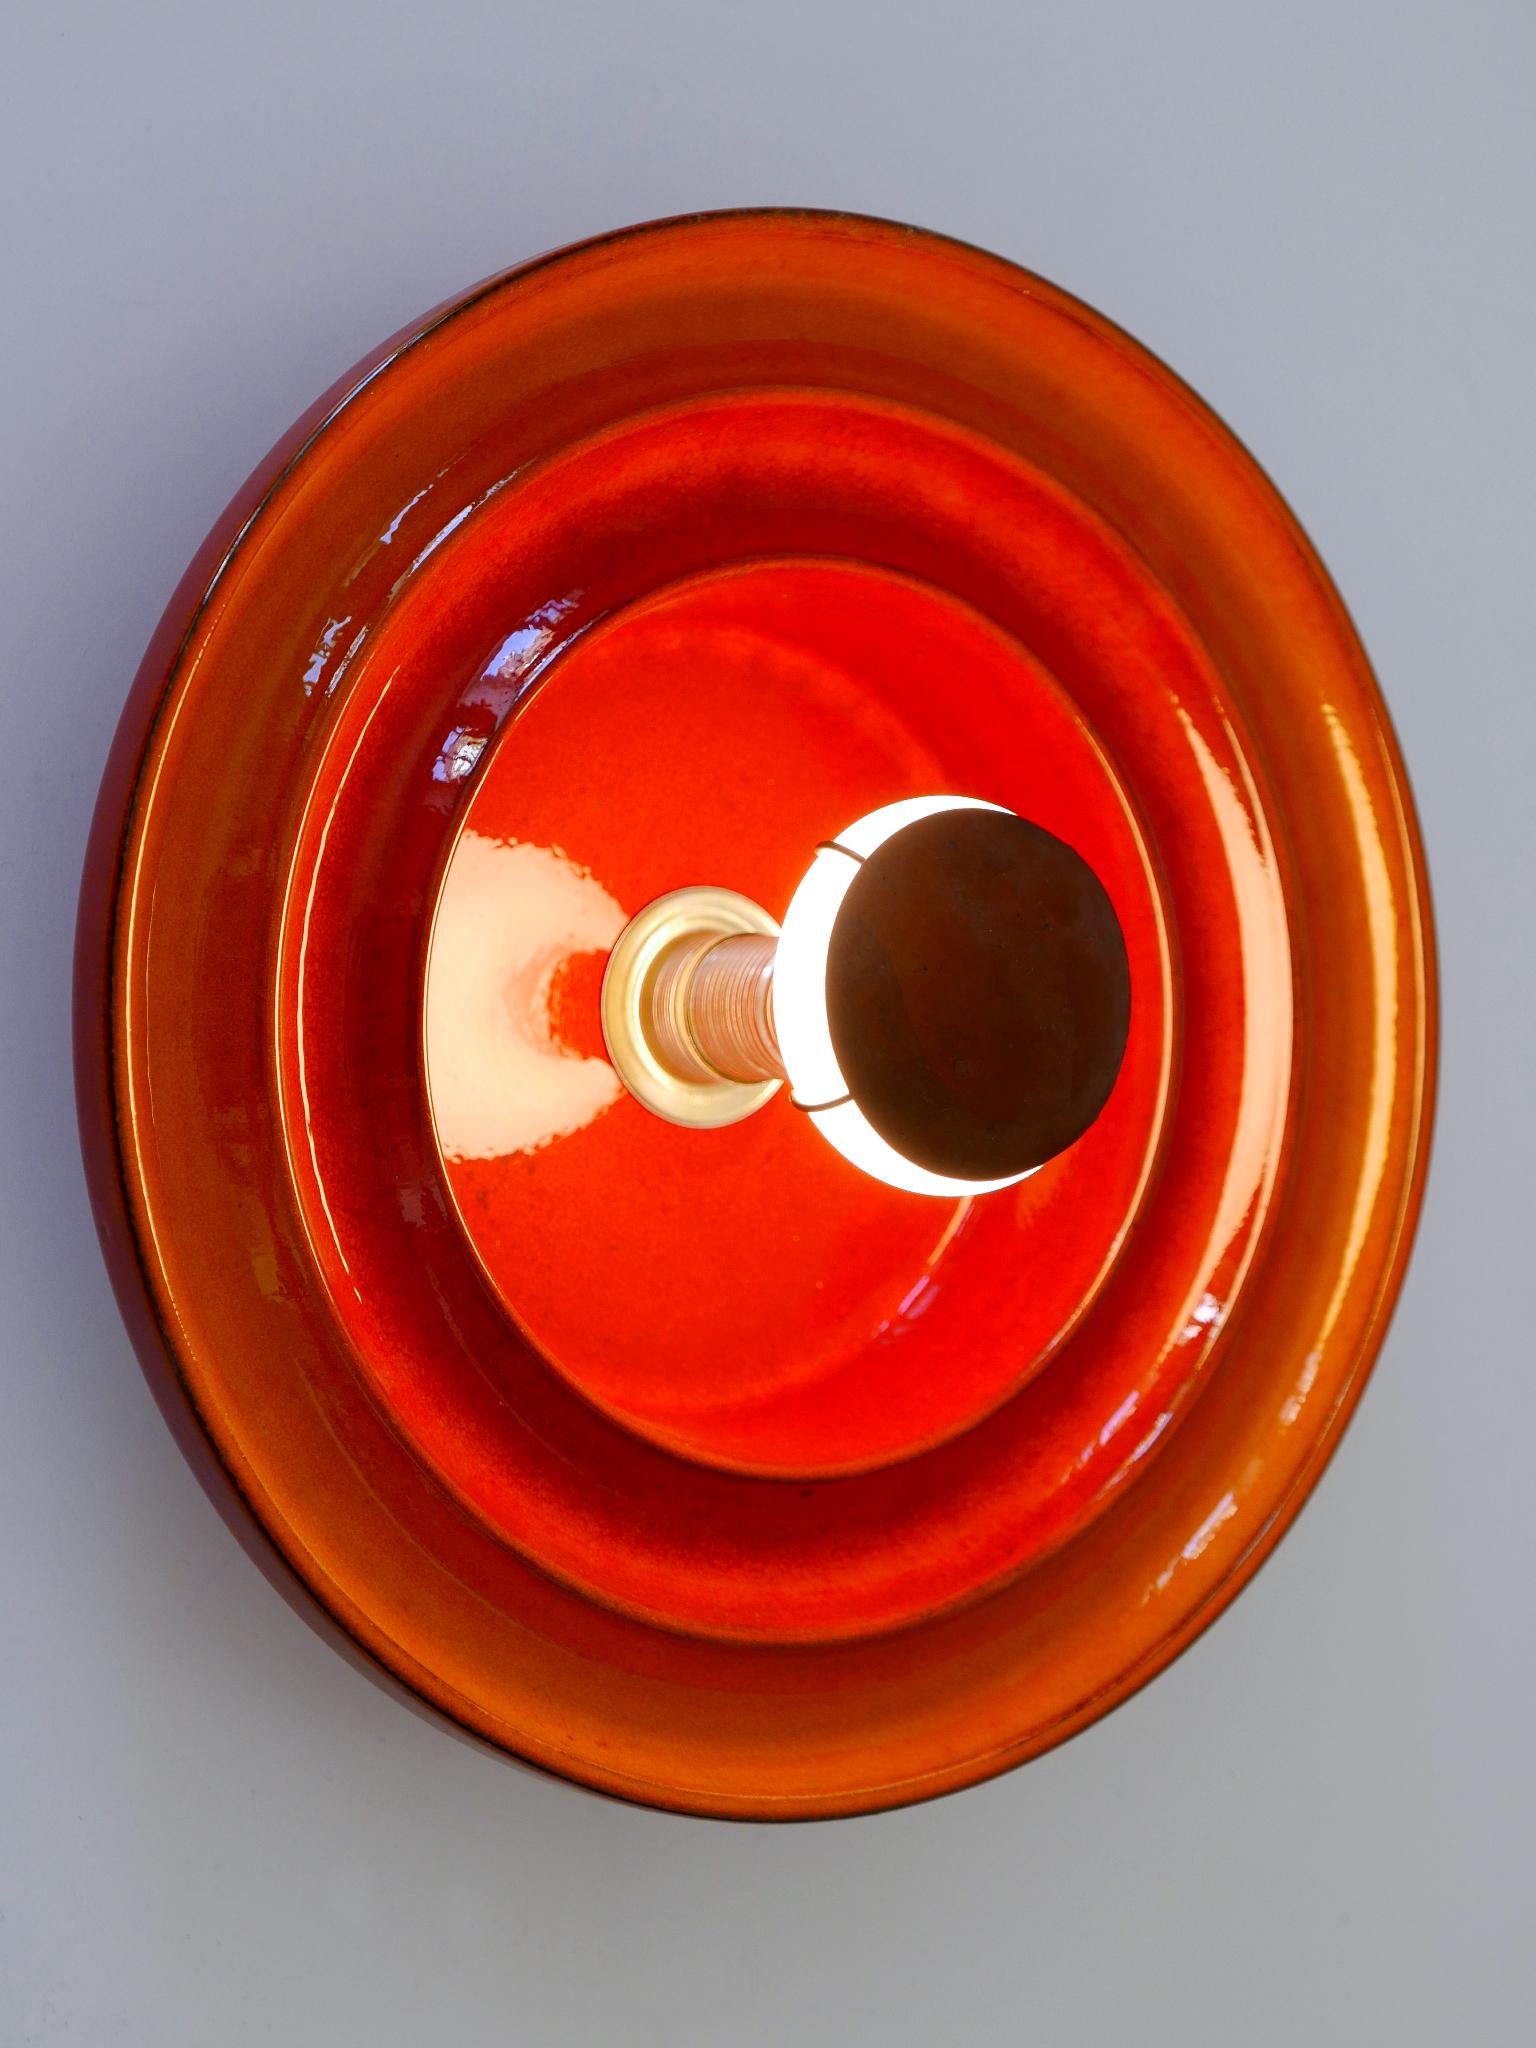 Mid-20th Century Highly Decorative Mid Century Modern Ceramic Sconce or Wall Light Germany 1960s For Sale